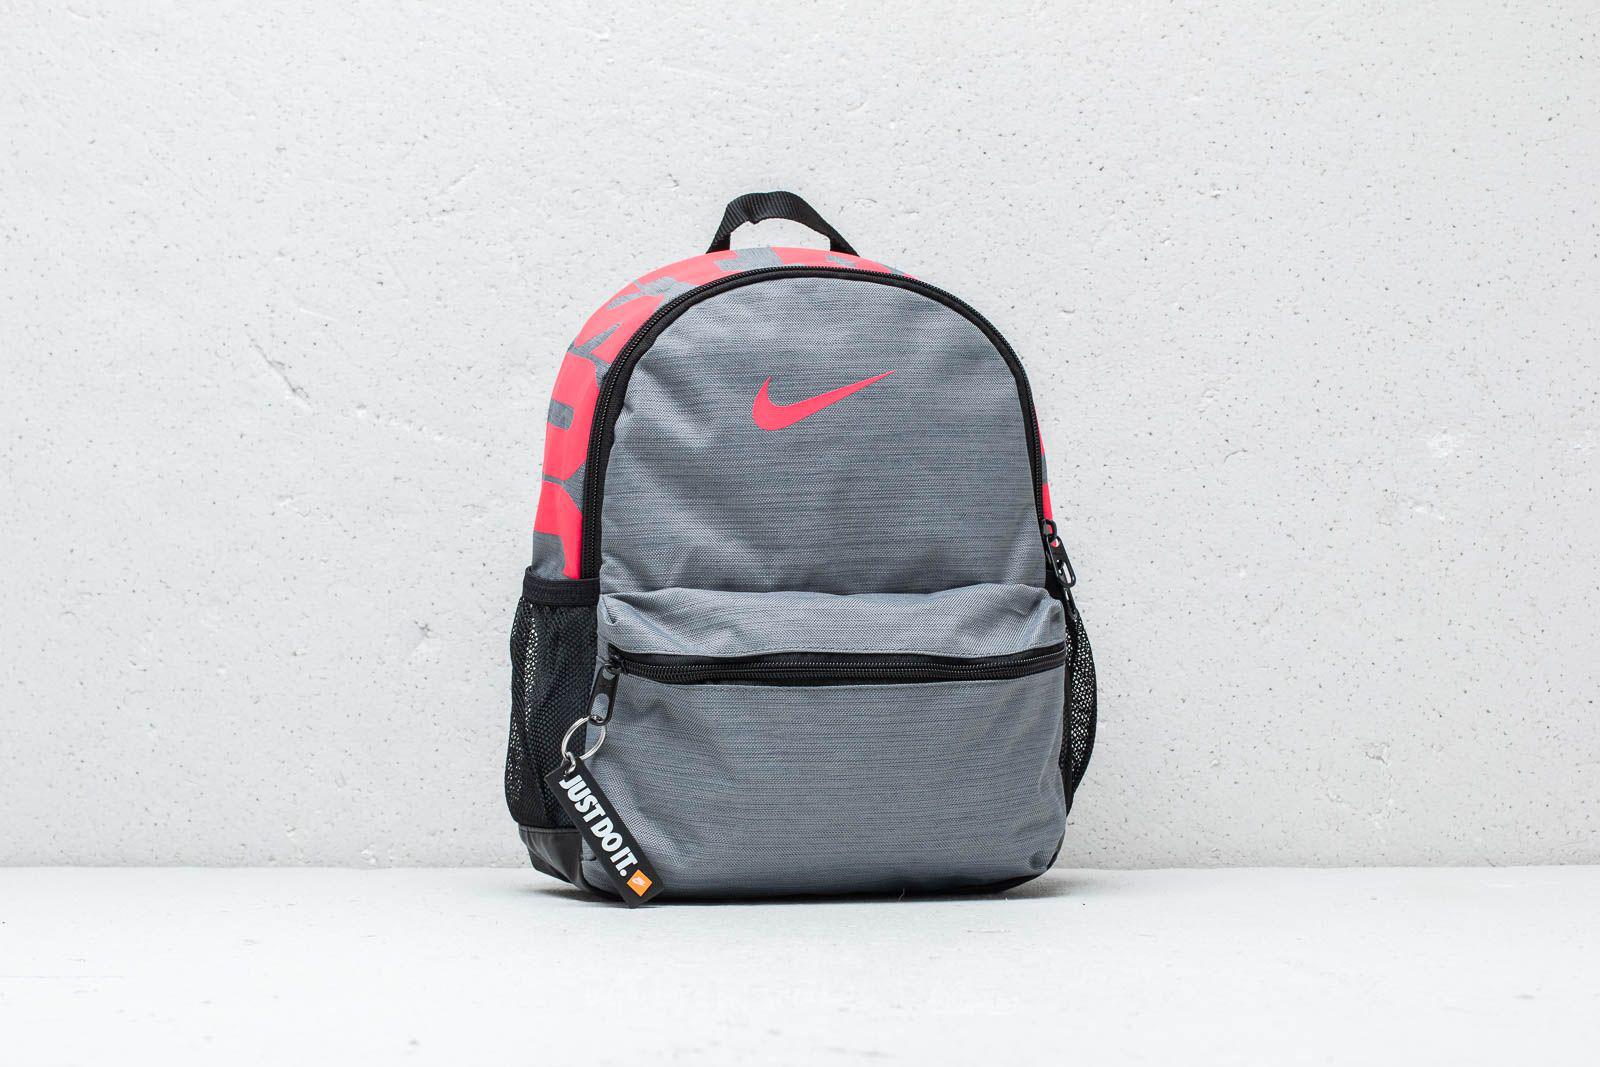 Nike Synthetic Just Do It Brasilia Mini Backpack Grey/ Pink in Gray - Lyst